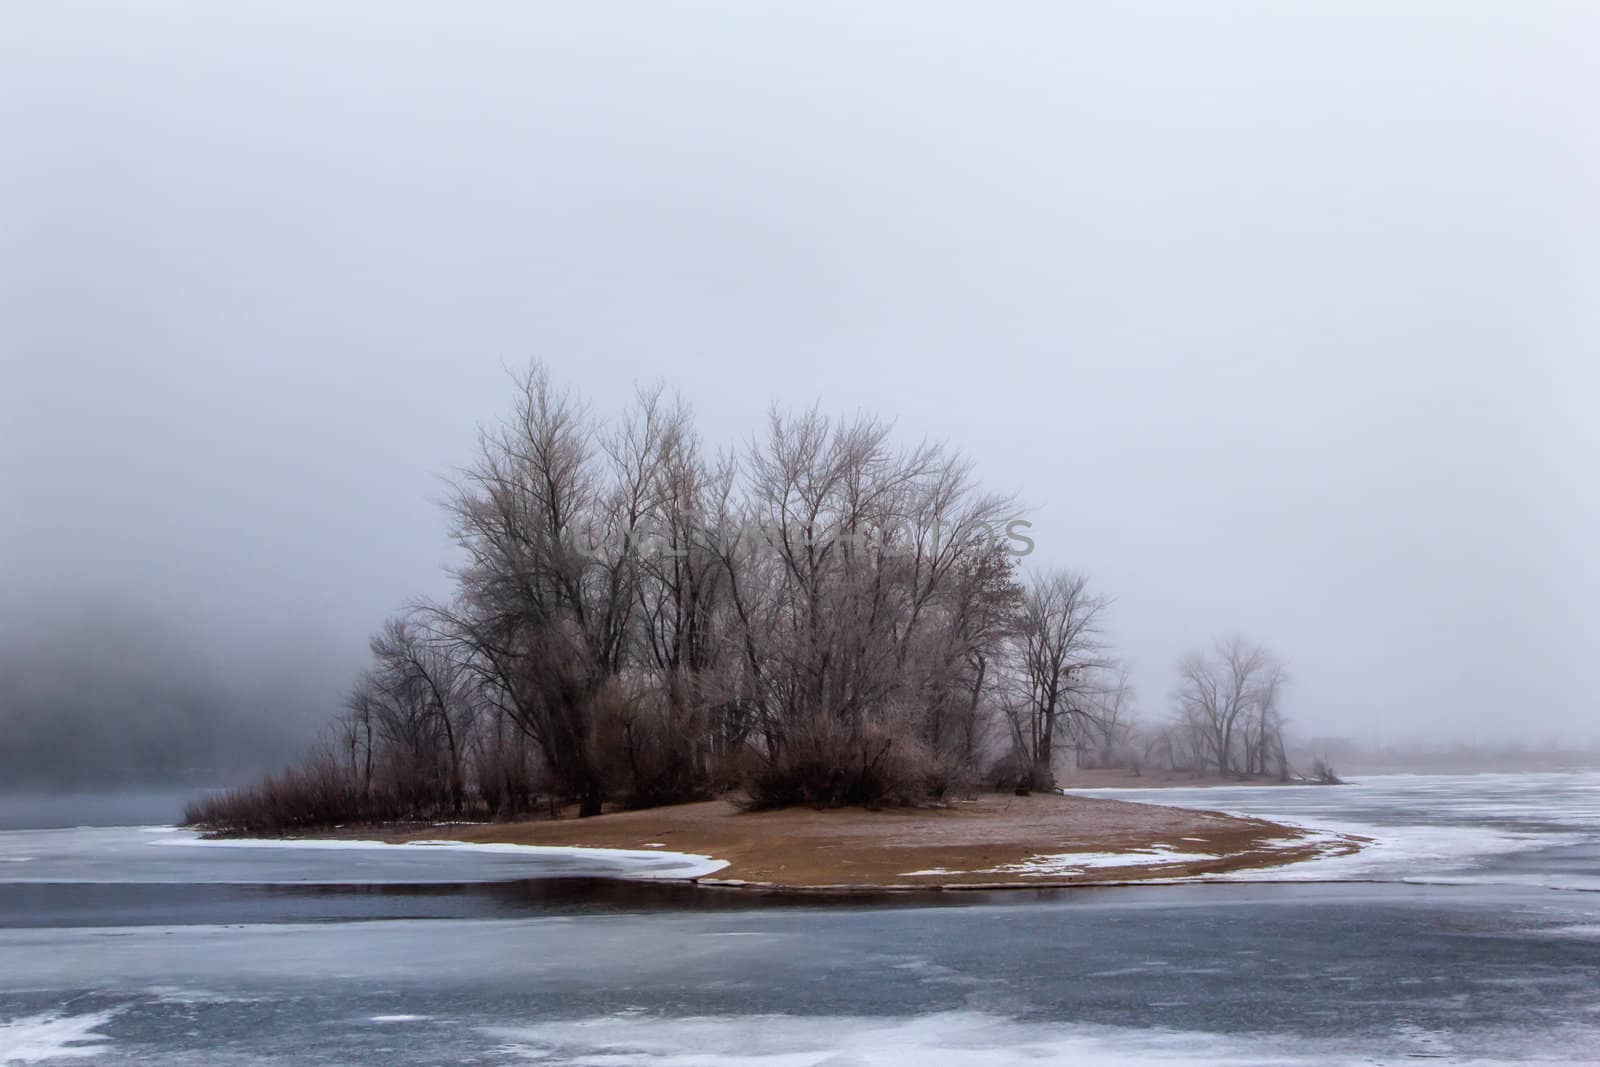 Foggy Winter Day on St,. Croix River by wolterk